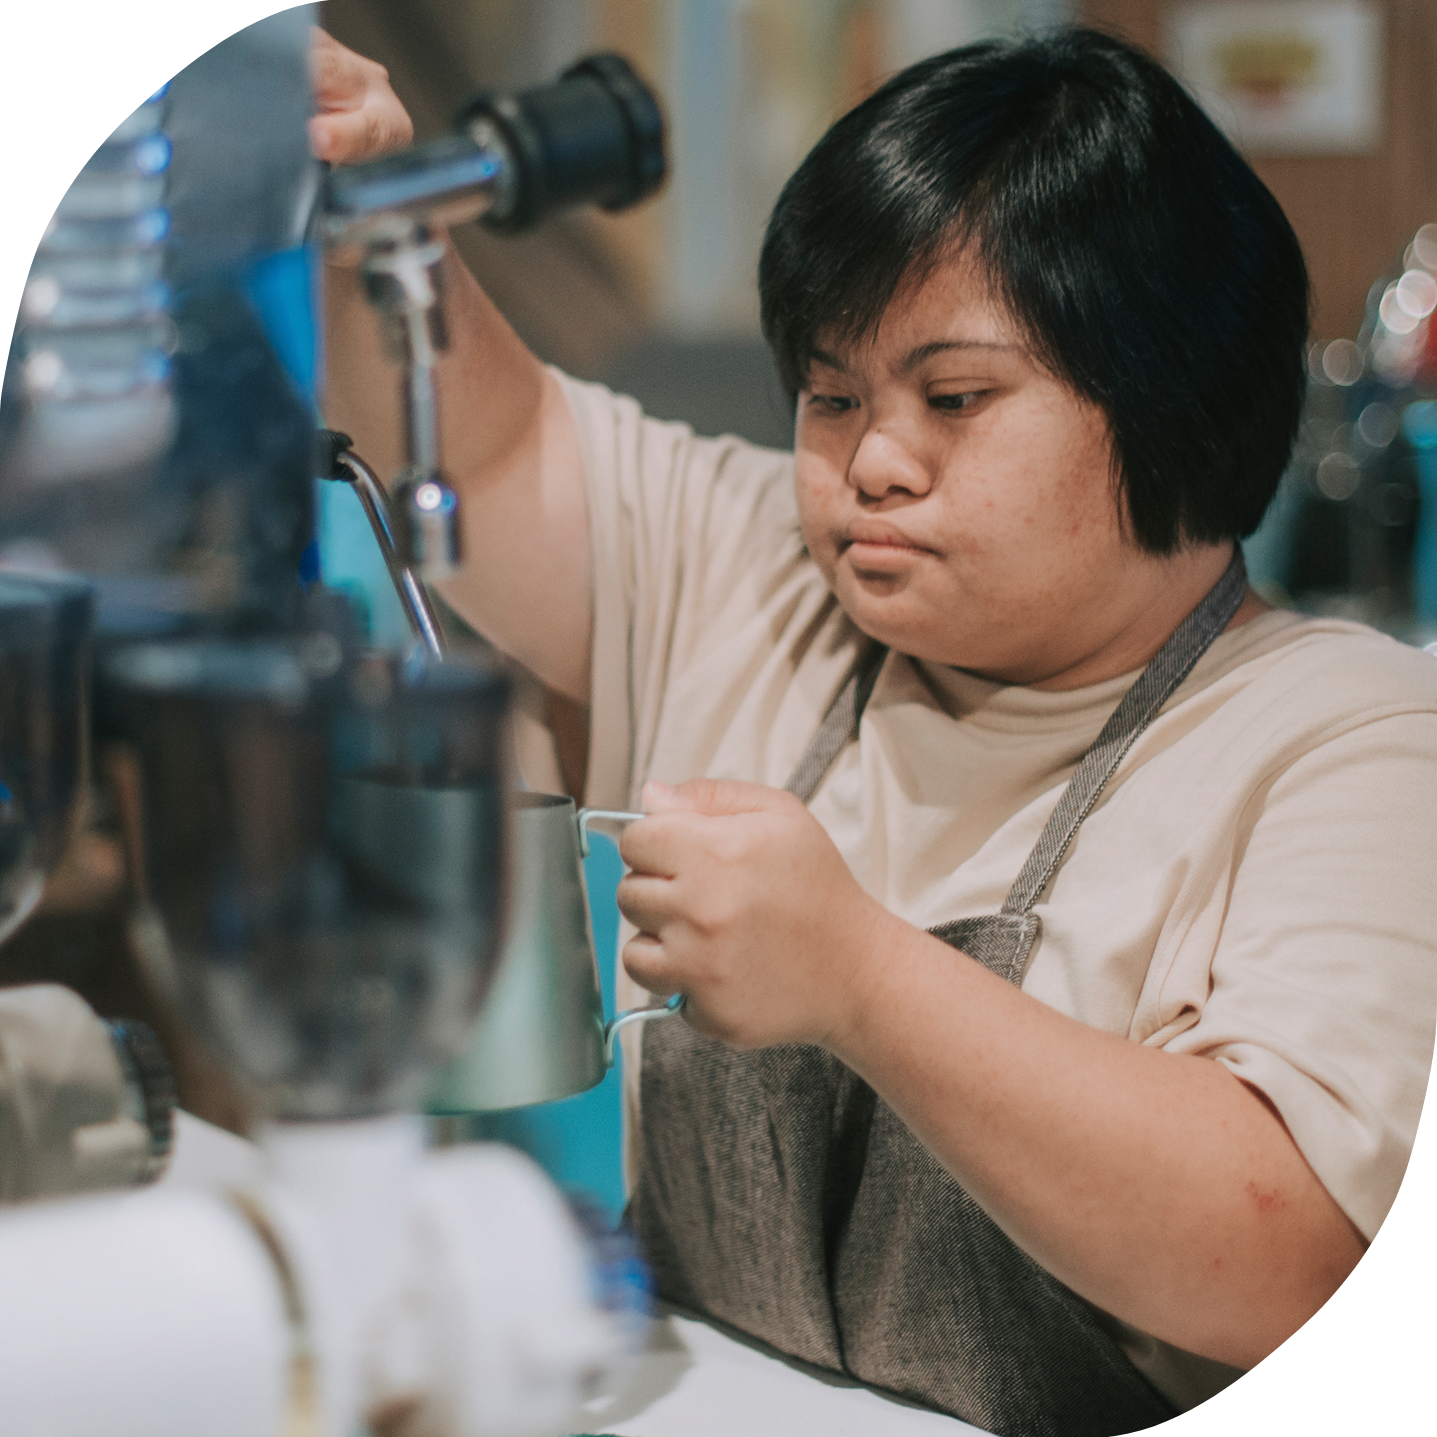 An Asian woman with down syndrome is working as a barista at a cafe. She is making a coffee.